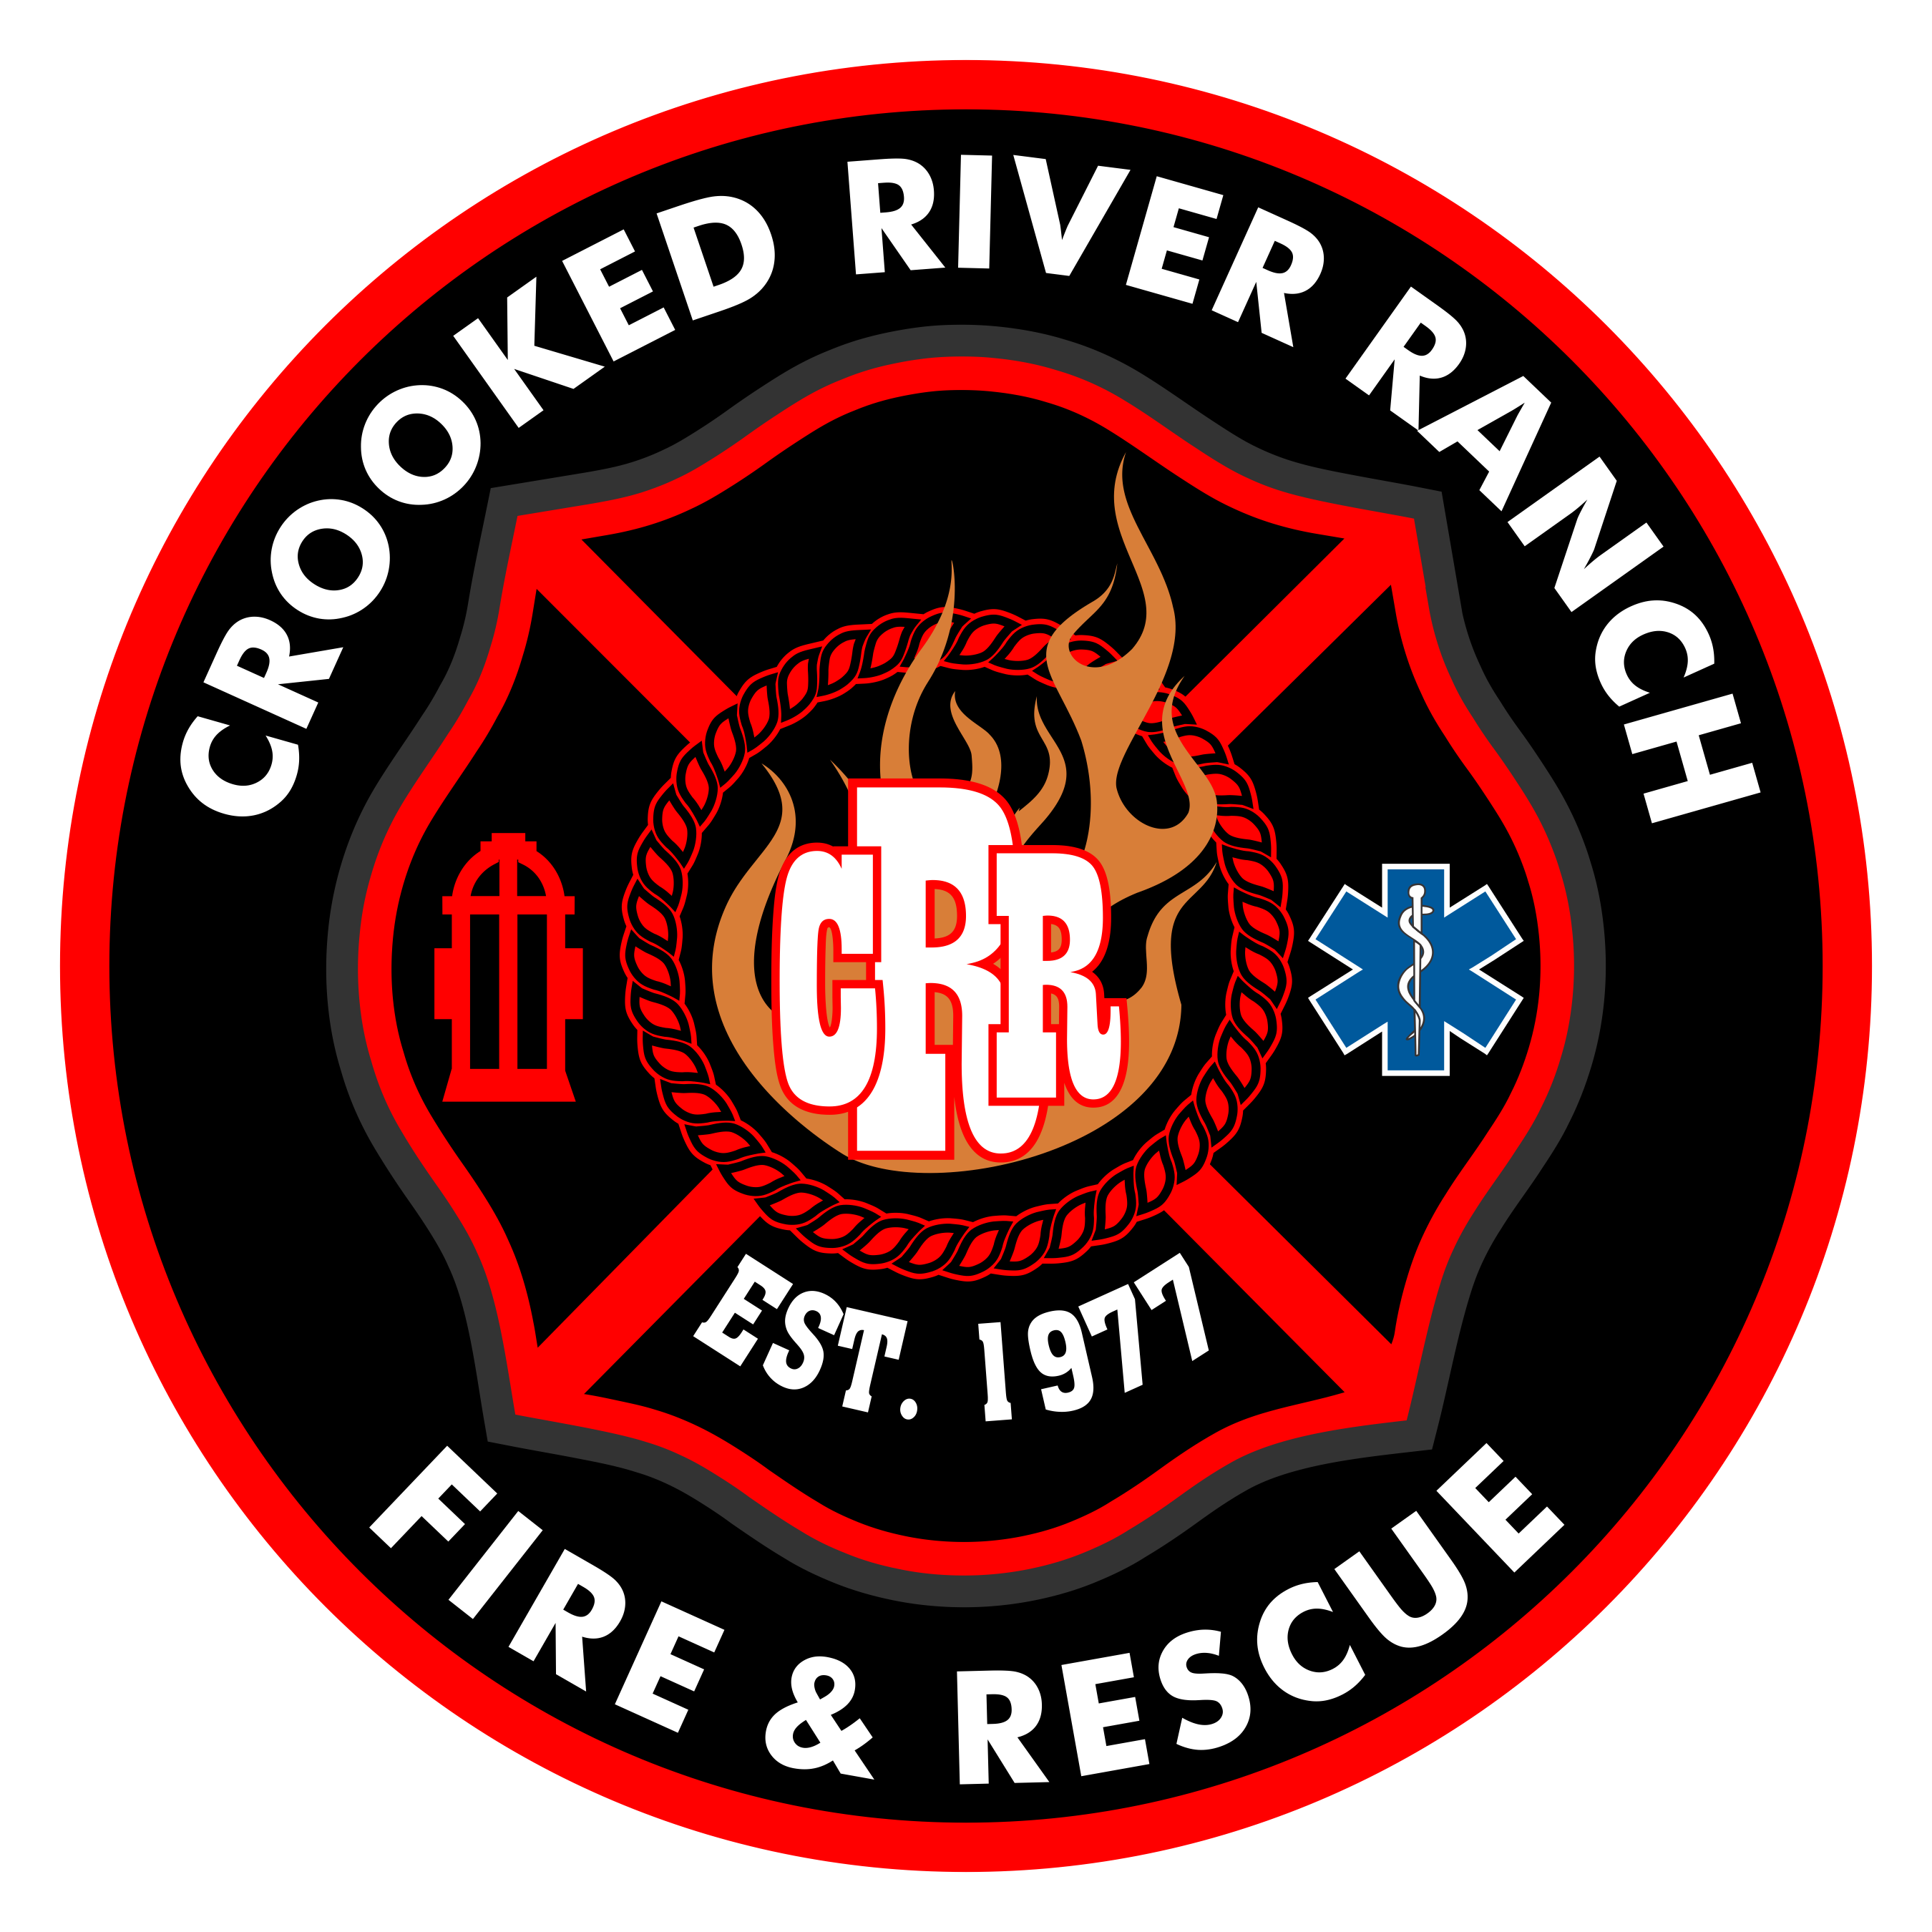 Official Crooked River Ranch Fire & Rescue Twitter account. Do not report emergencies here, Call 9-1-1. Not monitored 24-hours a day.